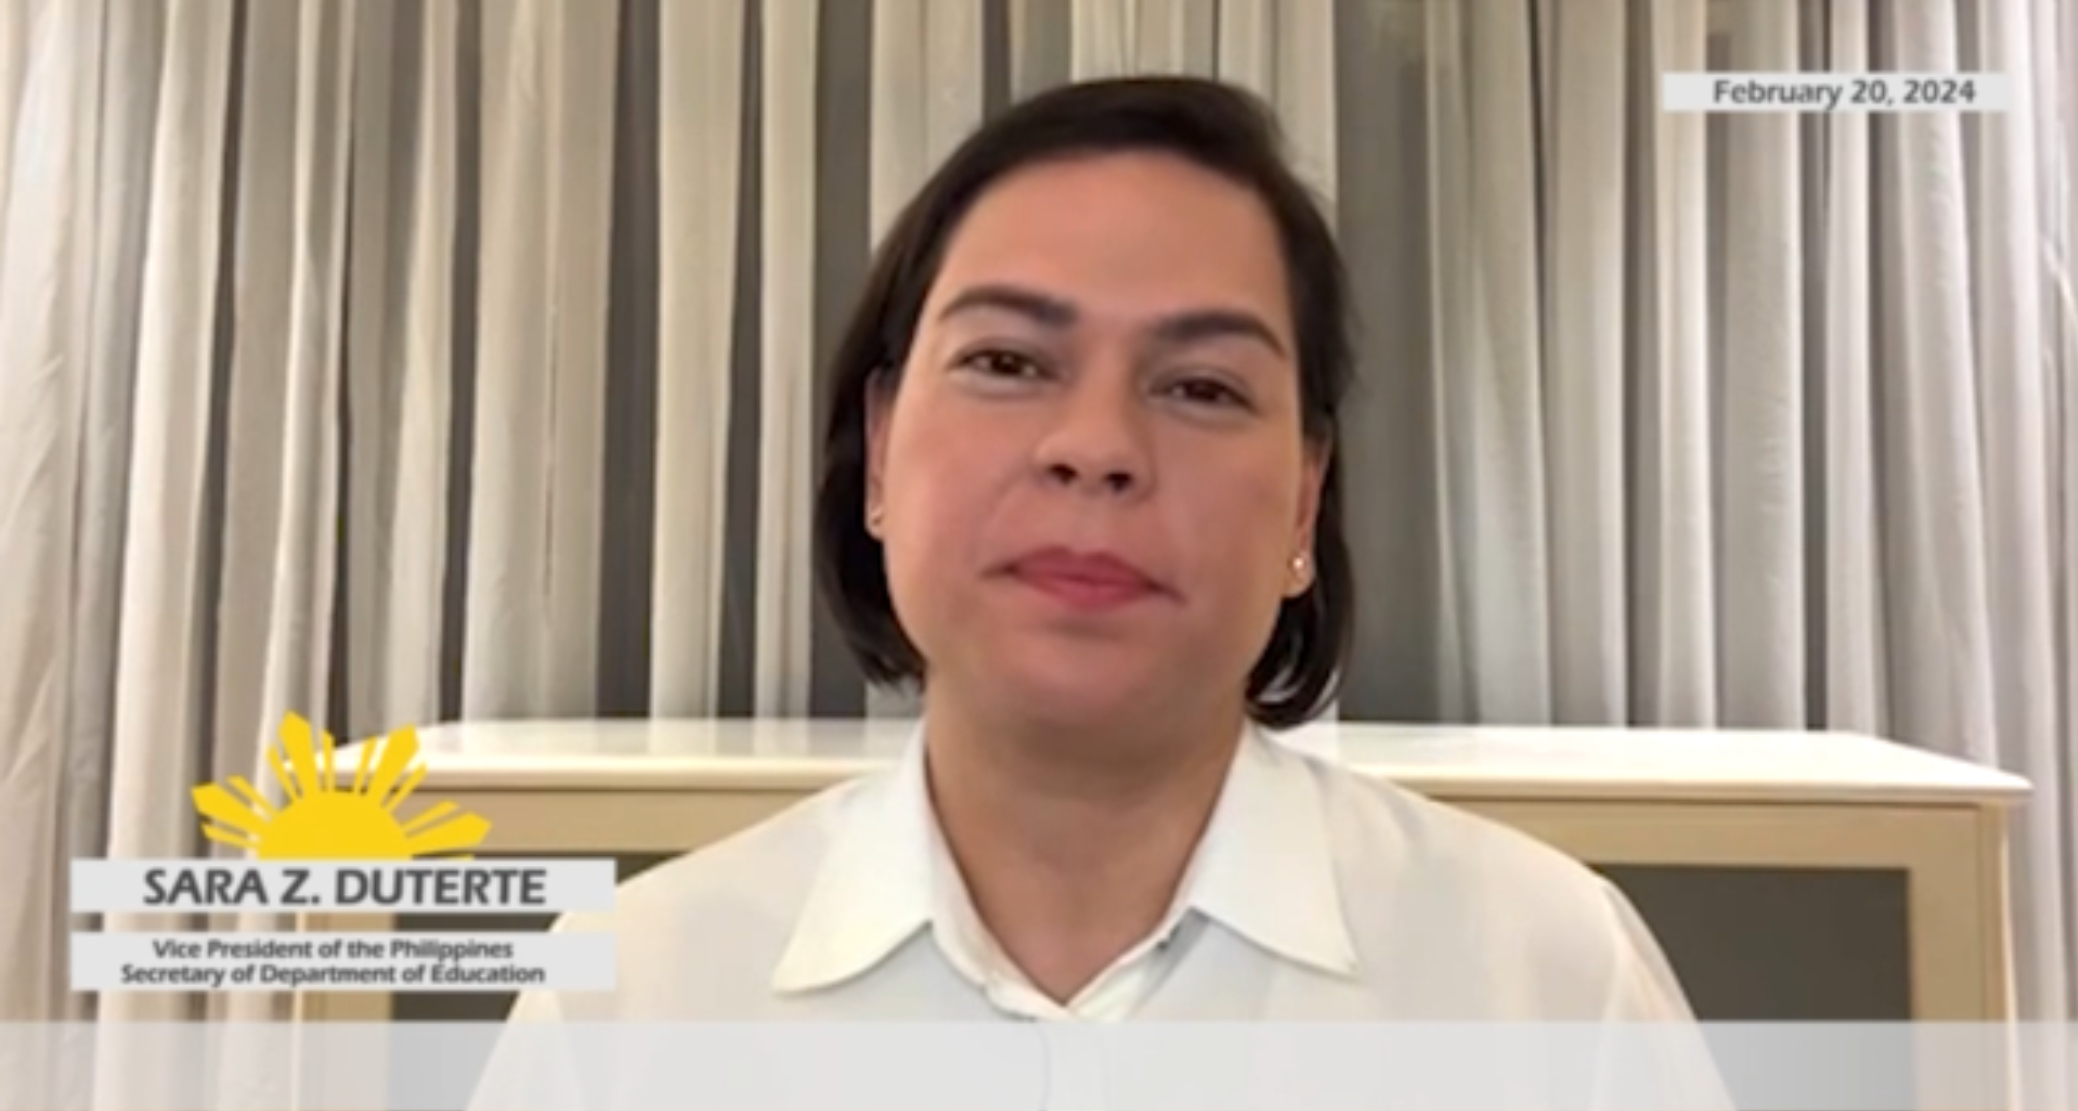 vp sara duterte undeterred by ‘attacks possibly by presidential aspirants'